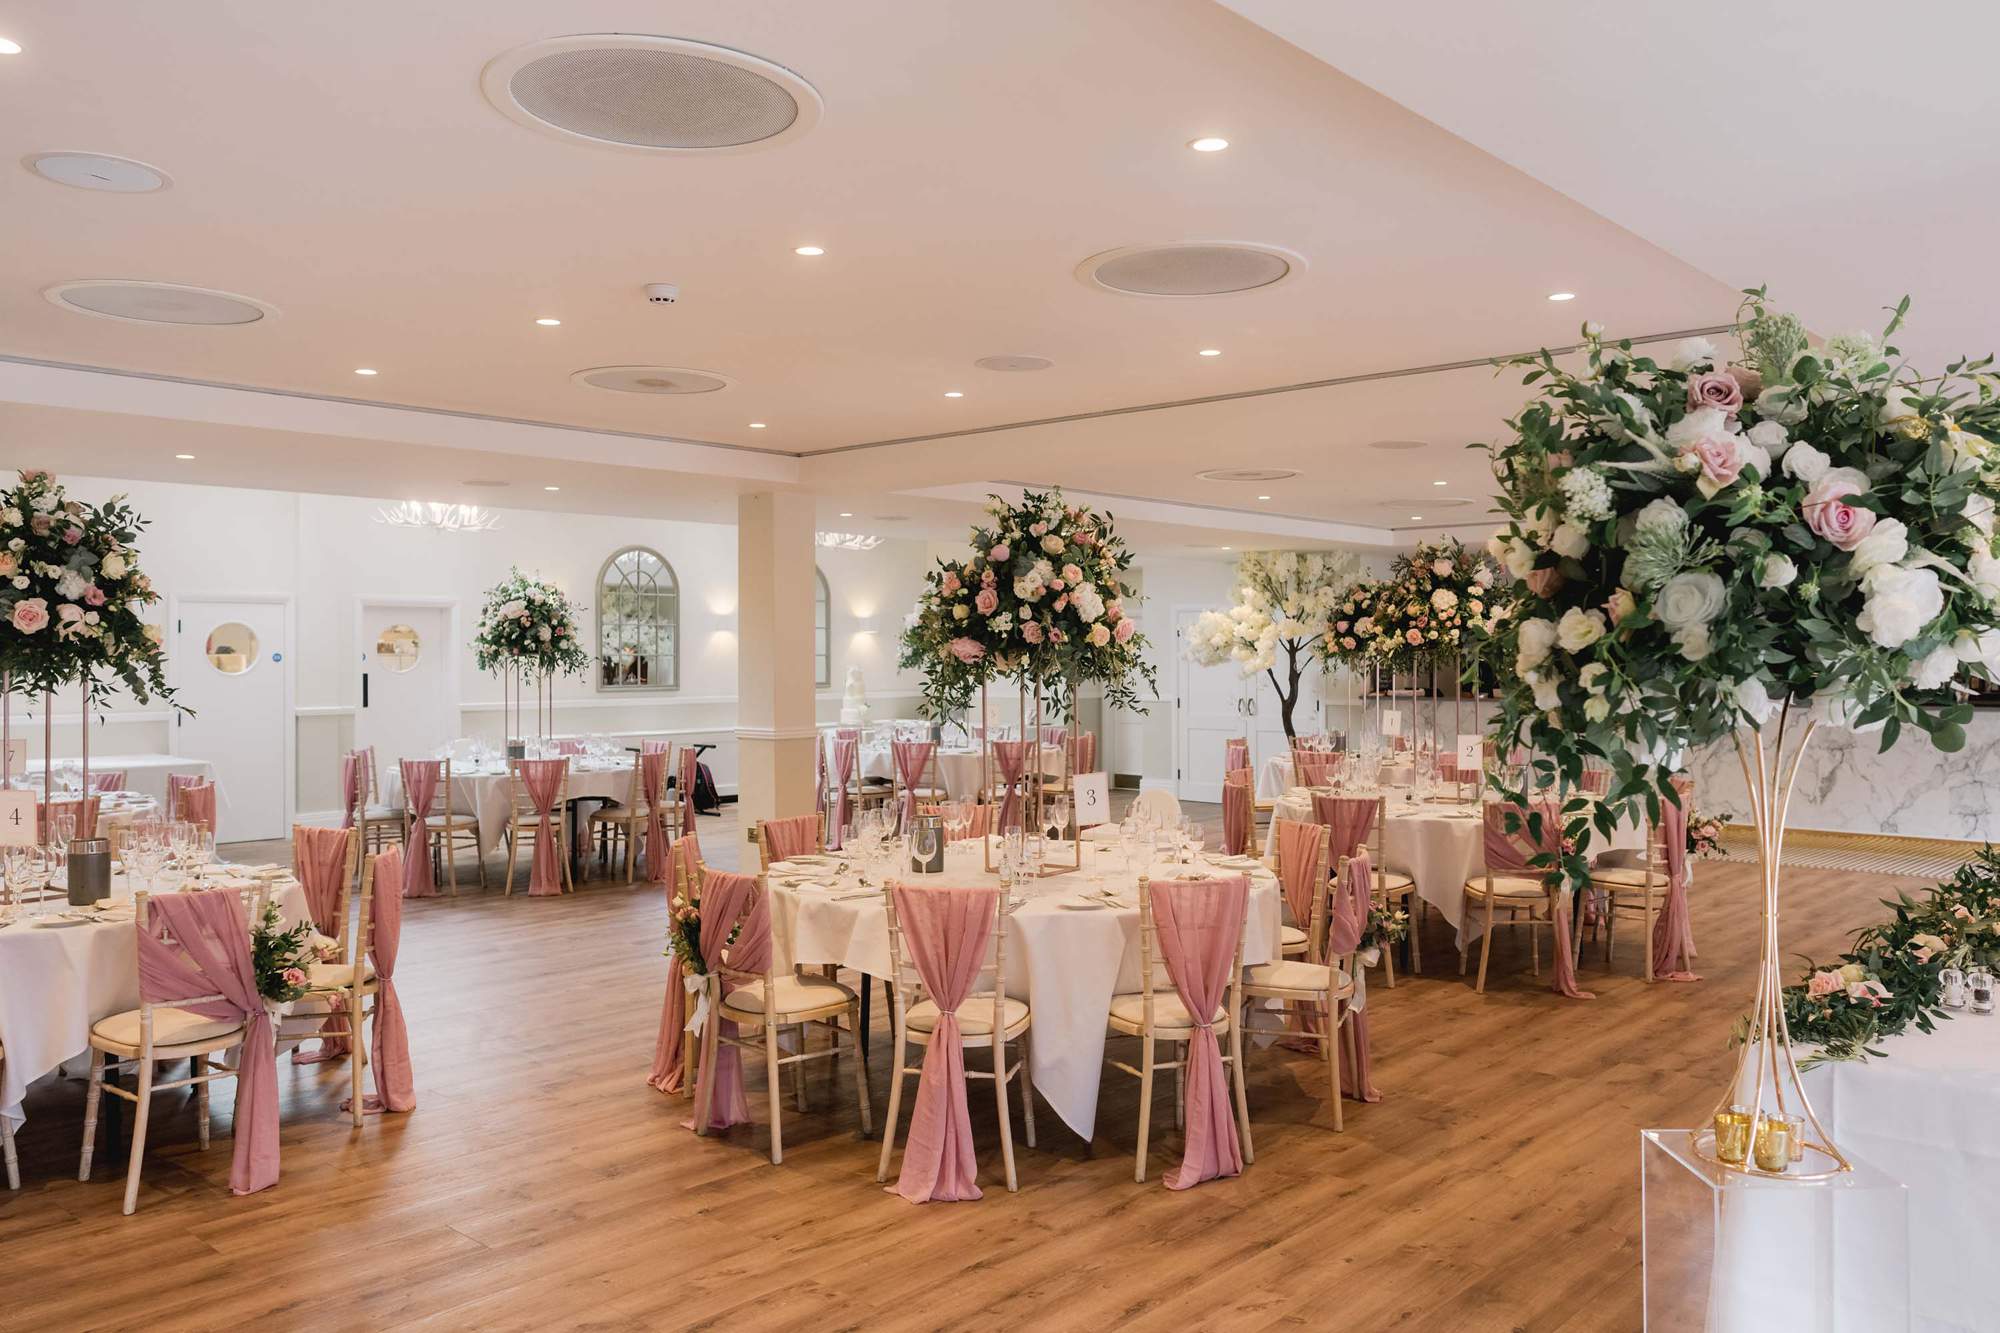 Cottesmore Golf Club wedding breakfast tables and chairs.